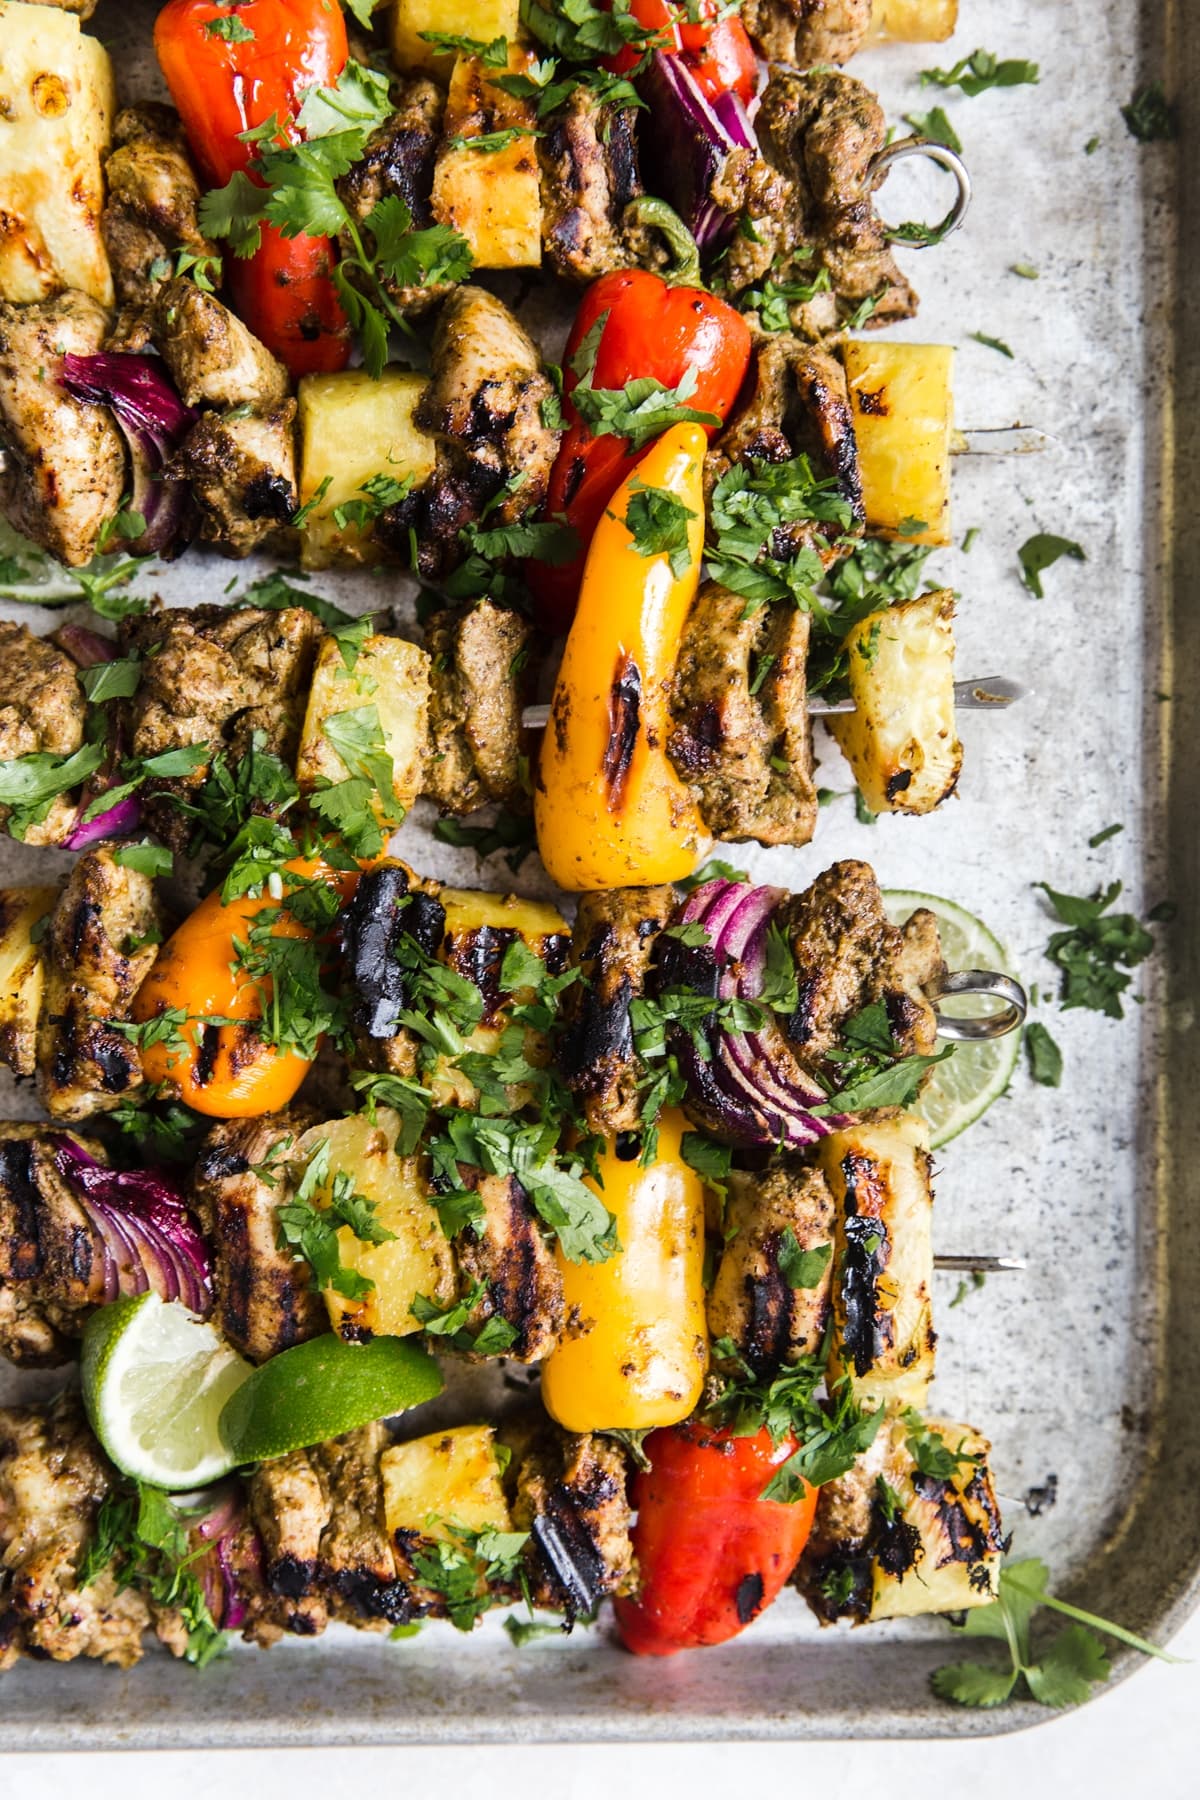 grilled jerk chicken kebabs with pineapple bell peppers limes and cilantro